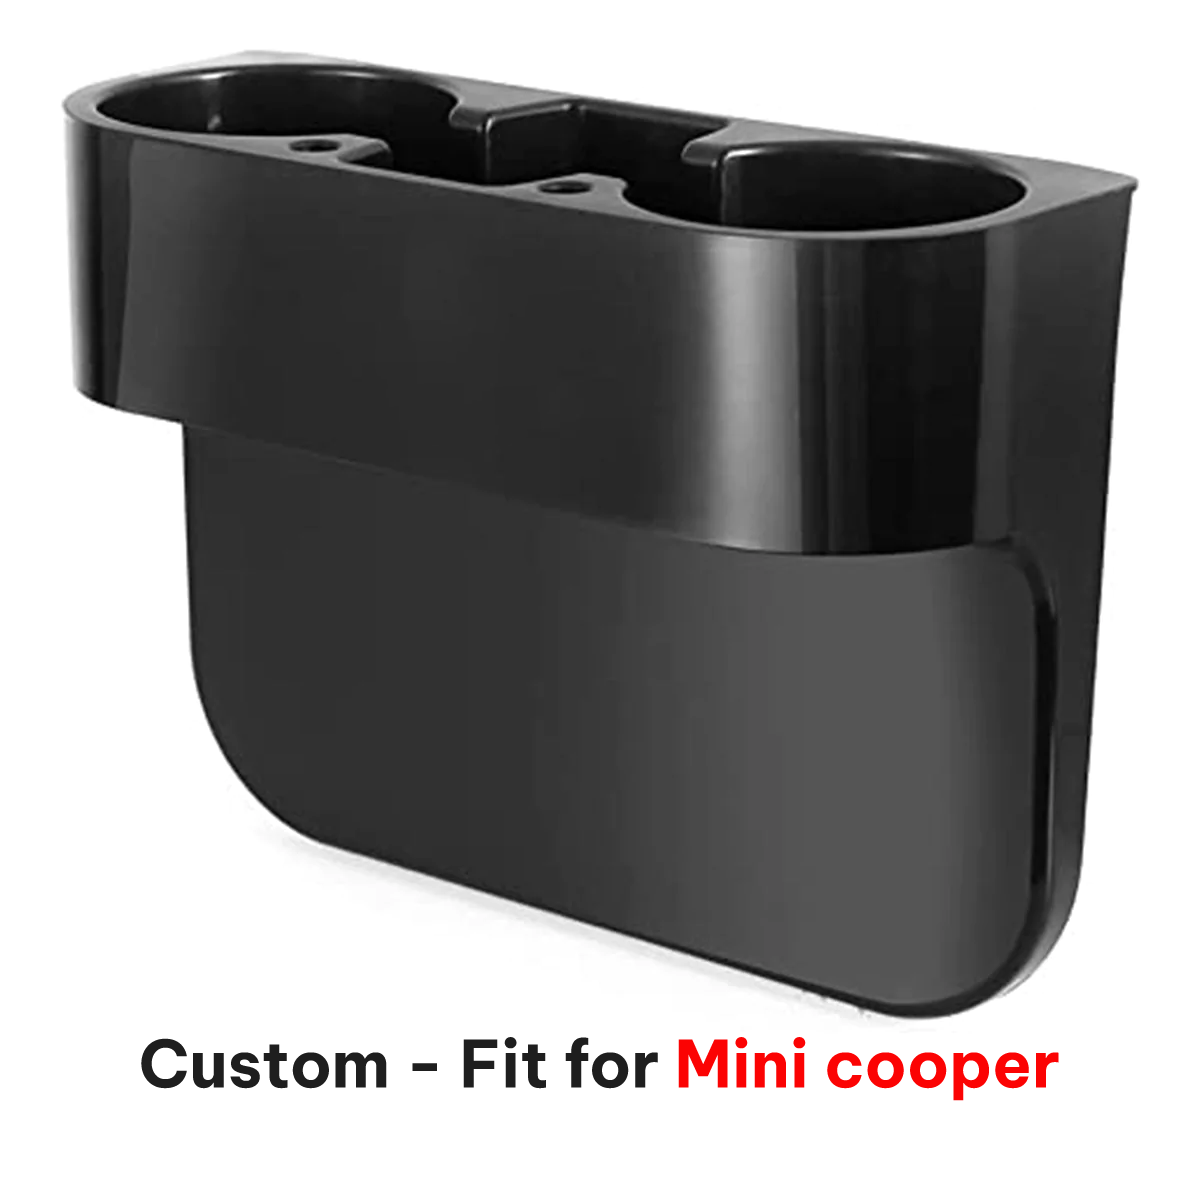 Cup Holder Portable Multifunction Vehicle Seat Cup Cell Phone Drinks Holder Box Car Interior Organizer, Custom-Fit For Mini Car, Car Accessories DLMT231